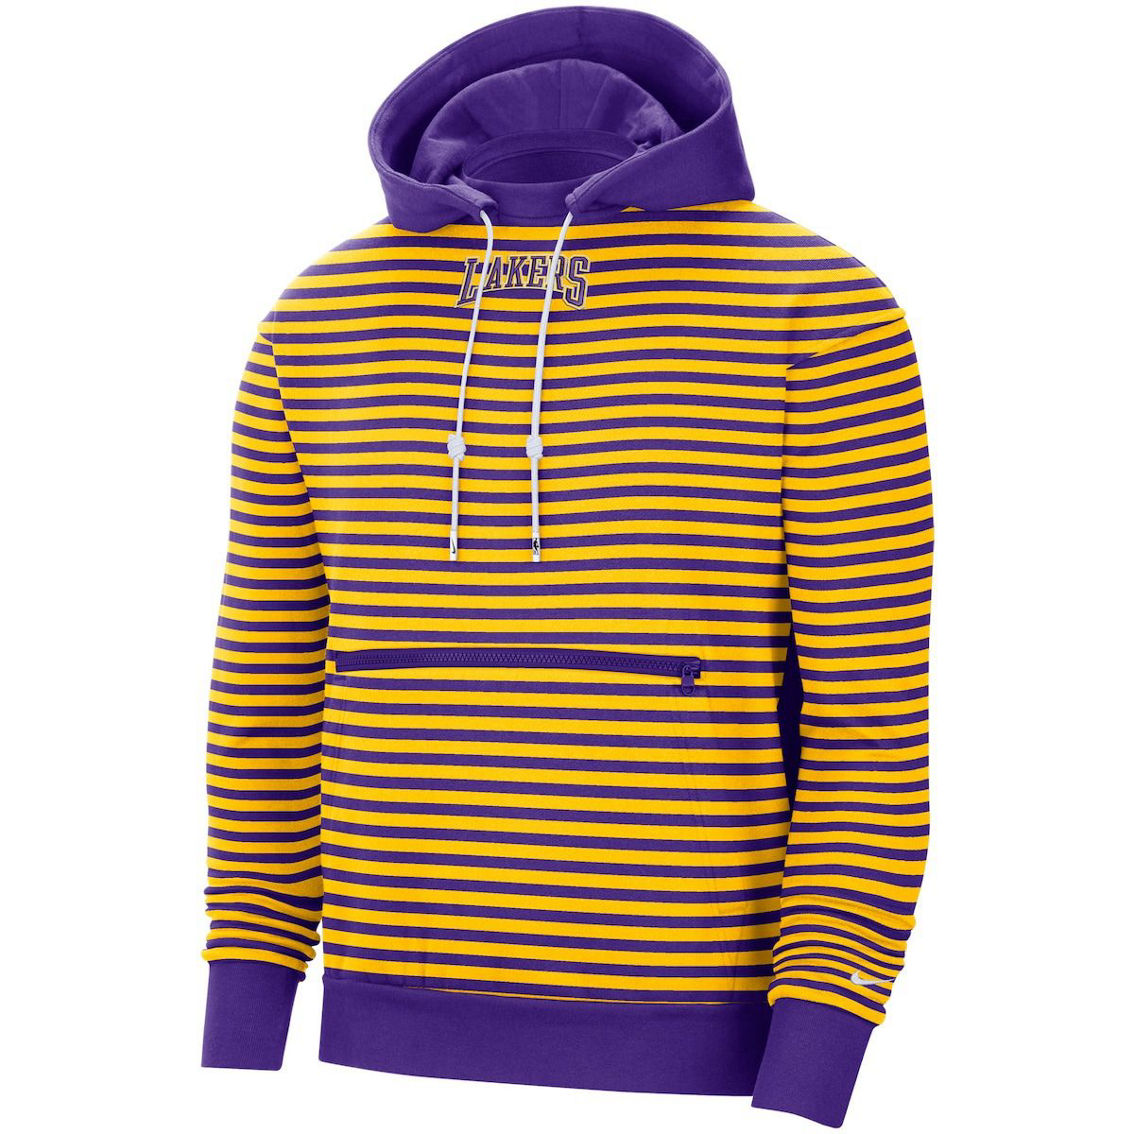 Nike Men's Gold/Purple Los Angeles Lakers 75th Anniversary Courtside Striped Pullover Hoodie - Image 3 of 4